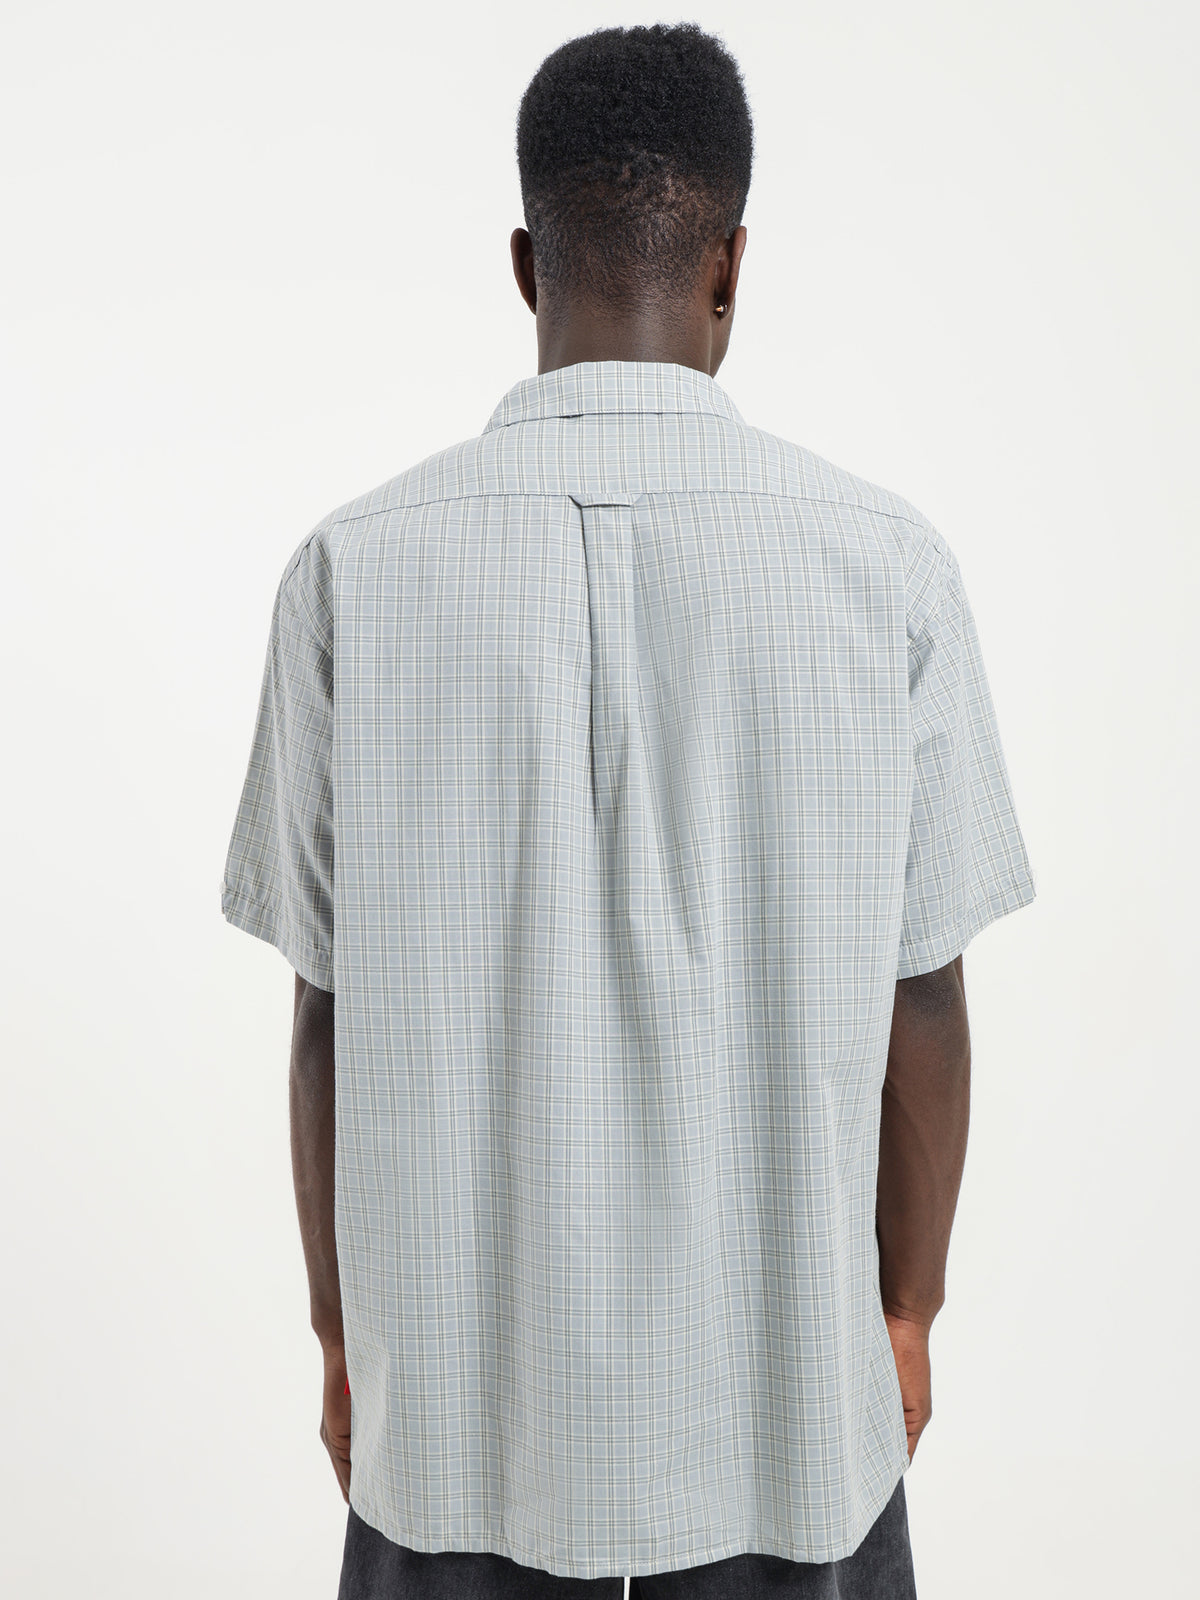 Check In Short Sleeve Shirt in Grey